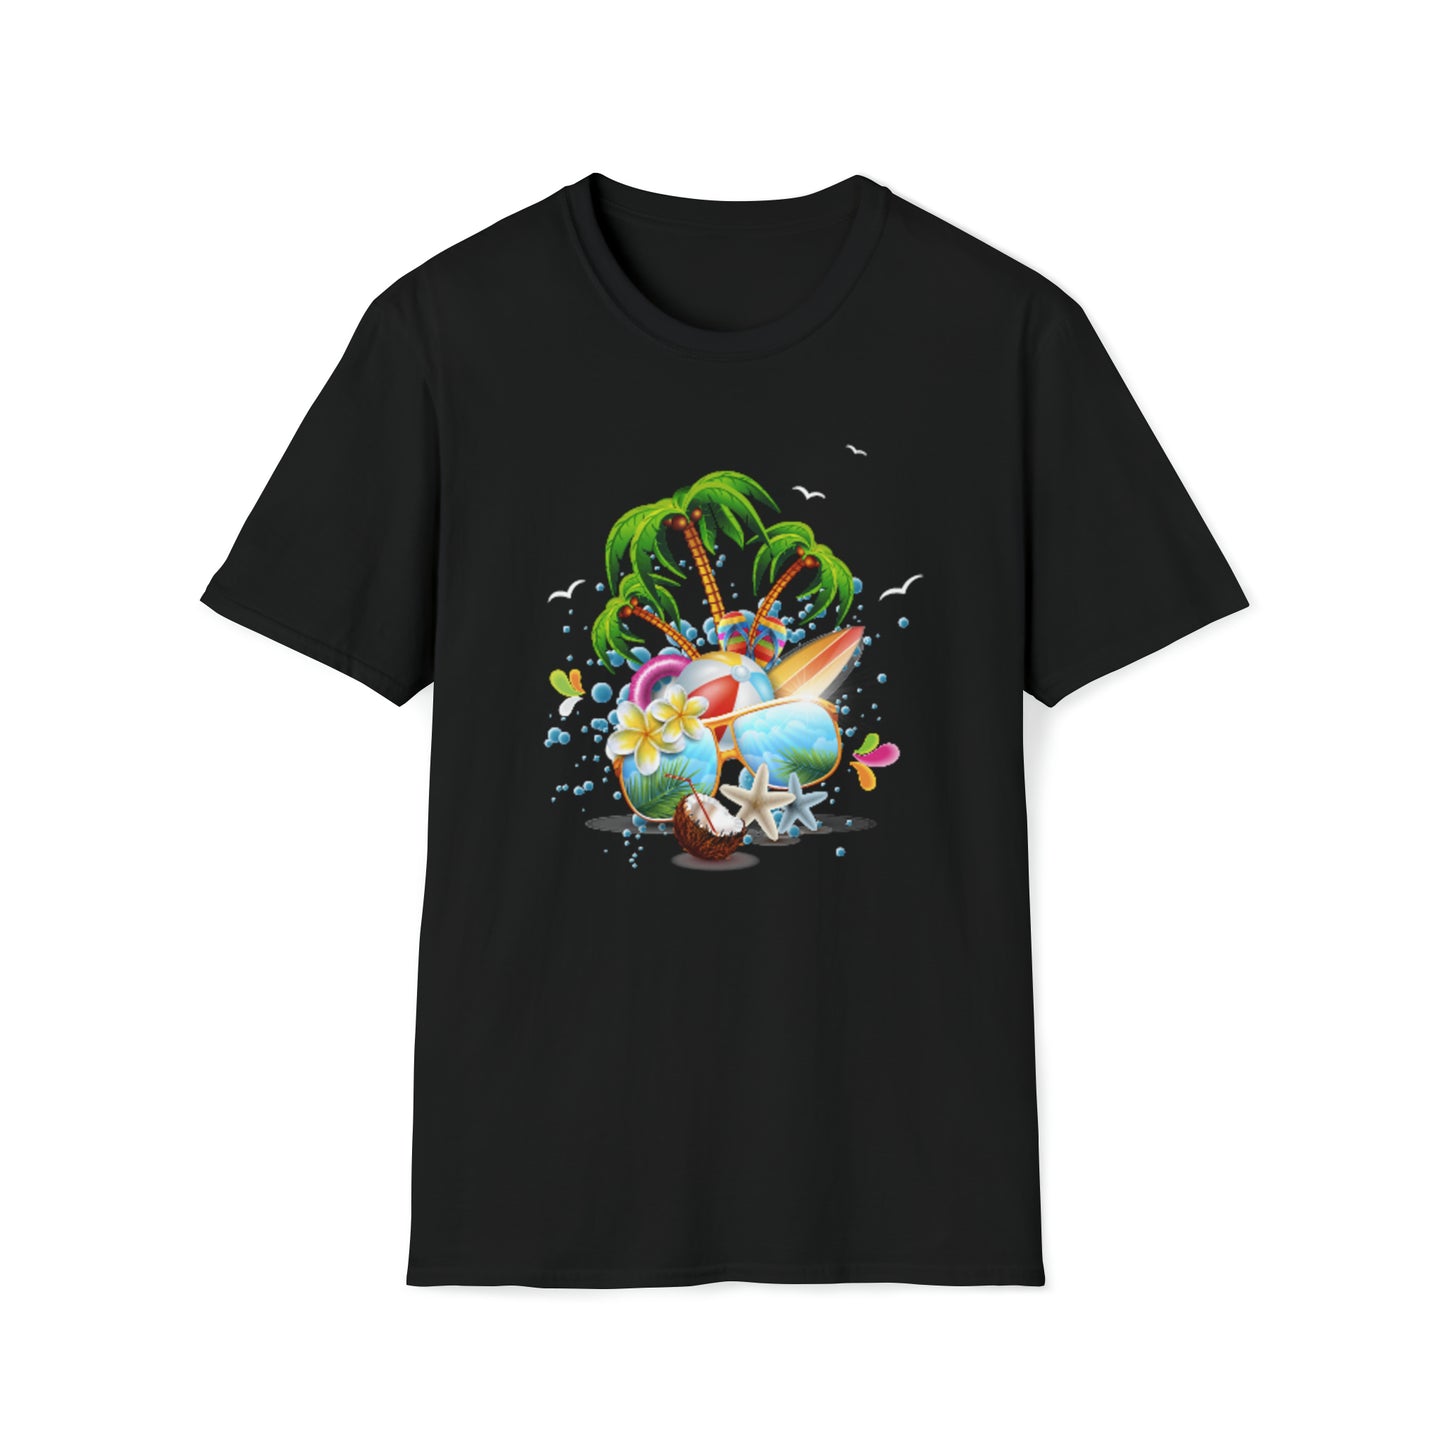 Unisex Softstyle T-Shirt The Child In Me 03 Beach